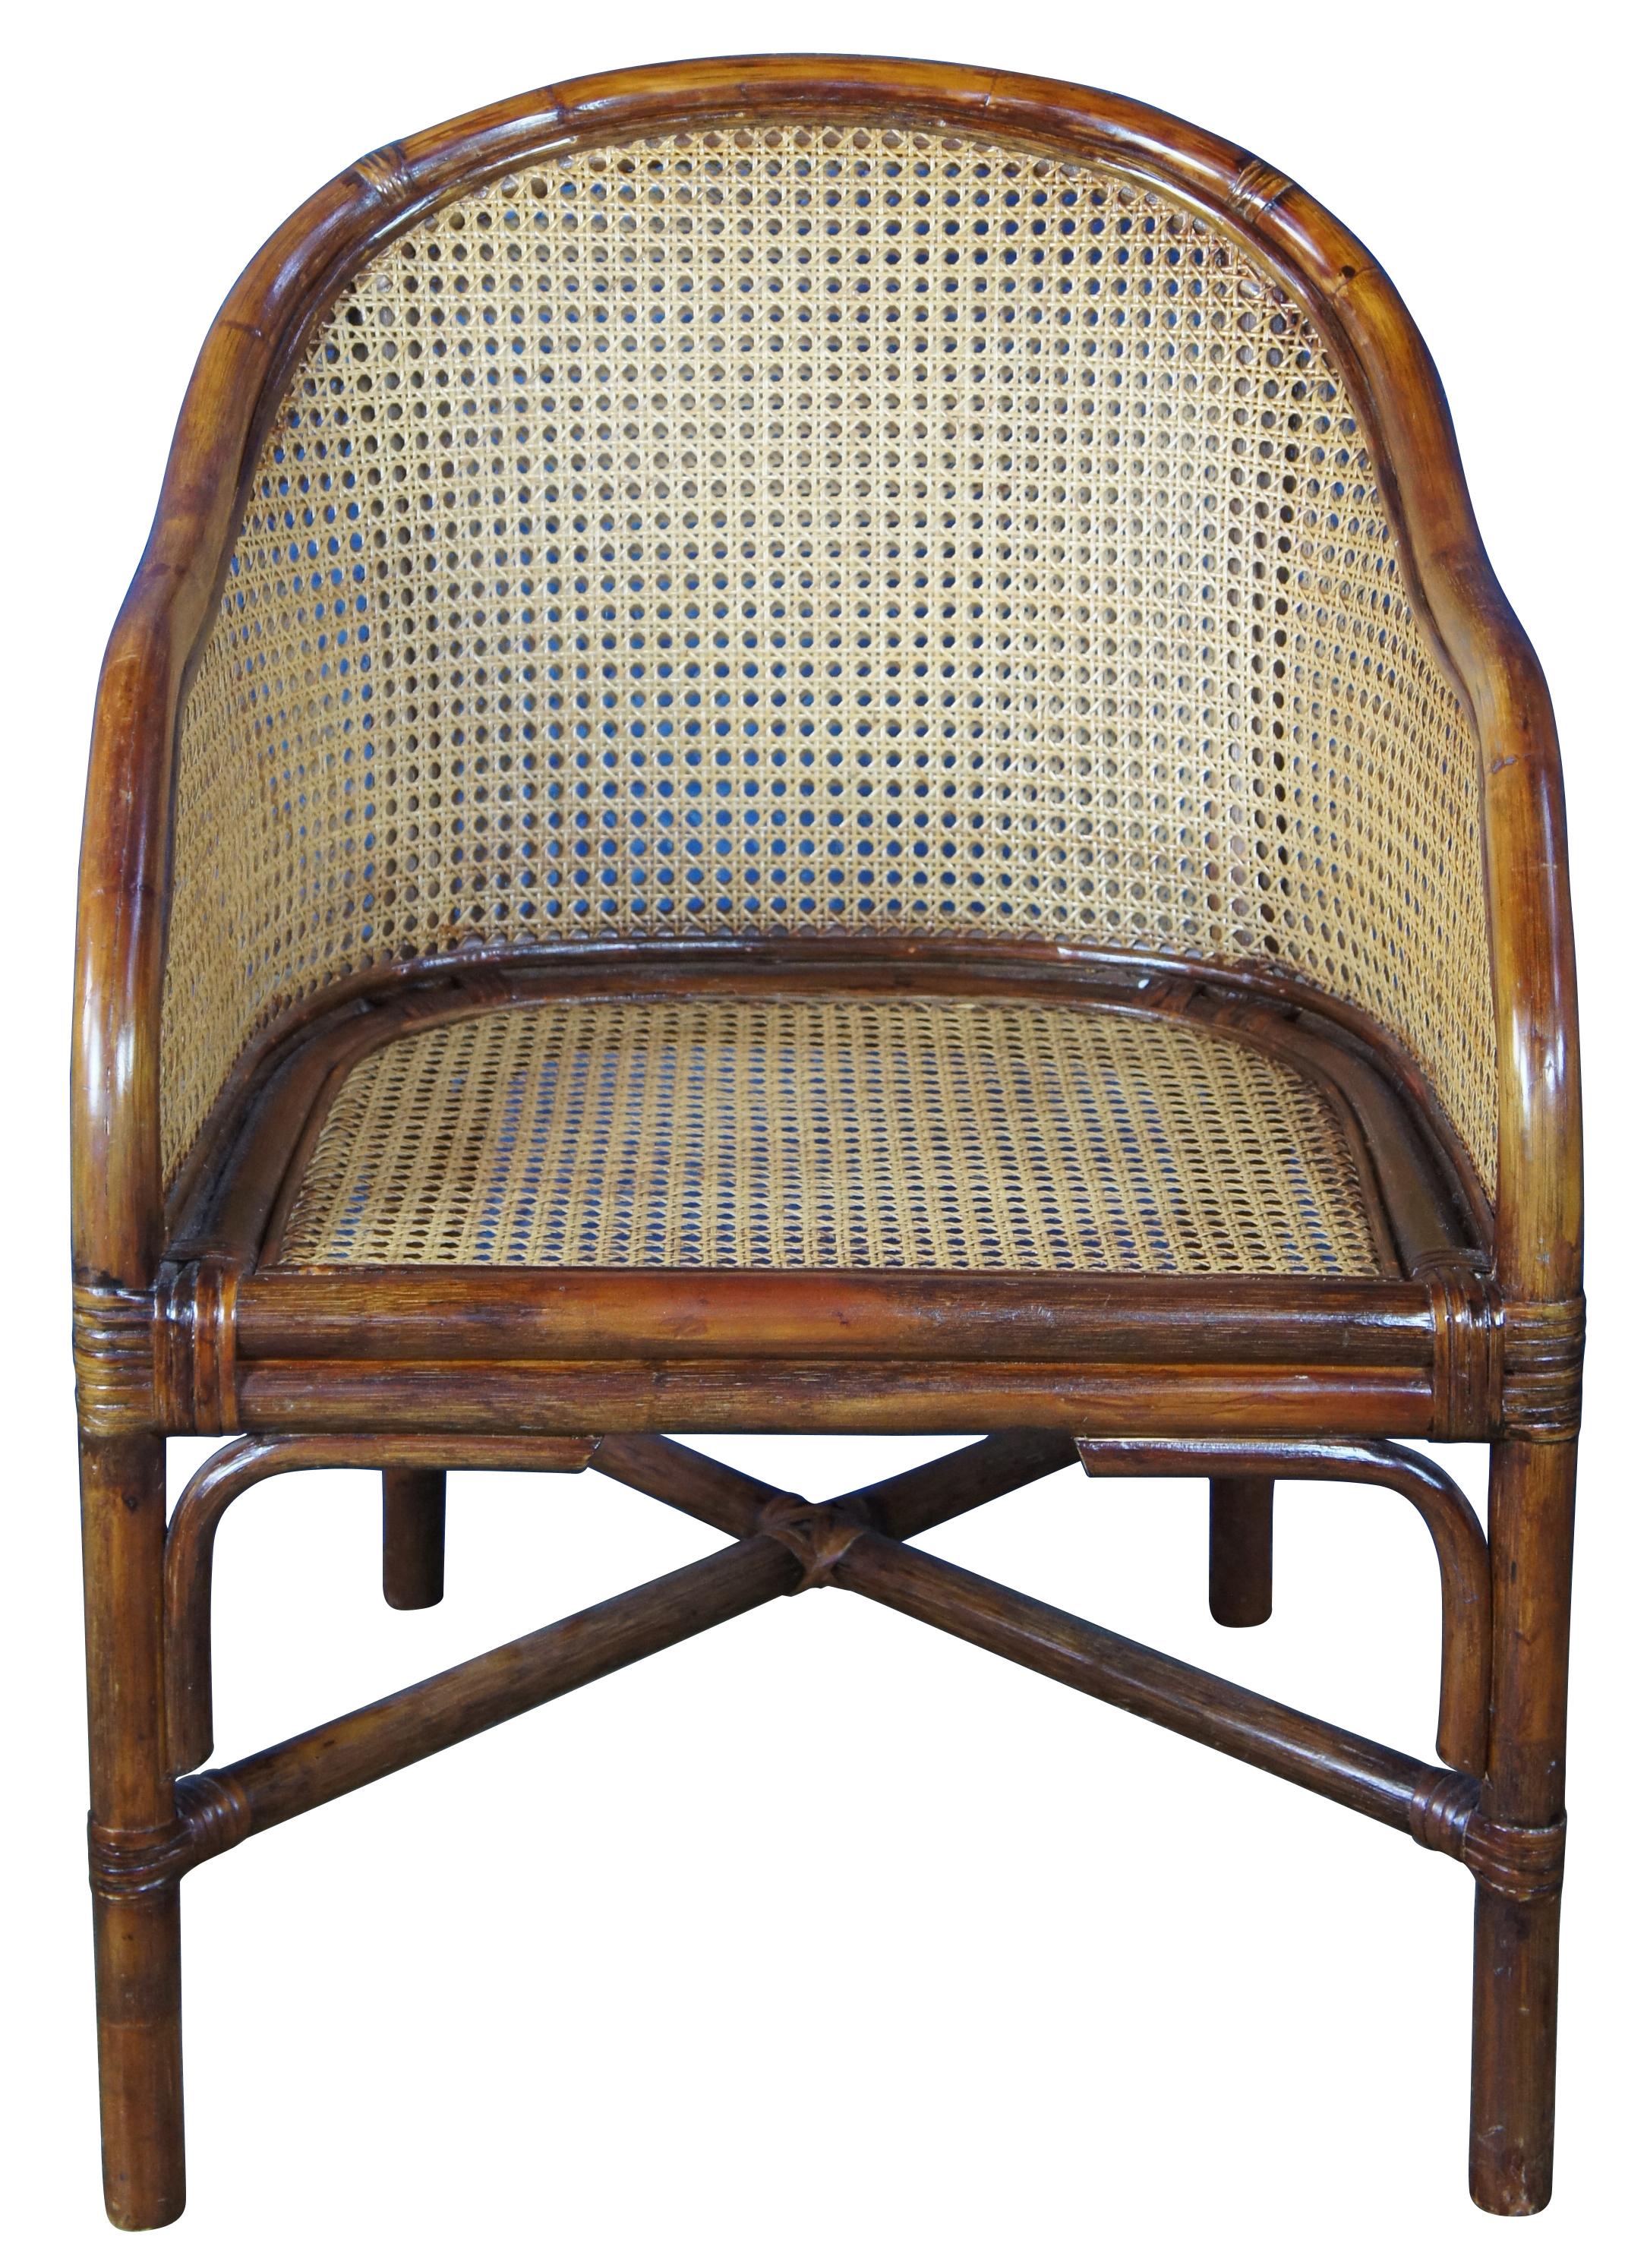 French Provincial Mid Century French Bentwood Bamboo Double Caned Rattan Bergere Club Chair